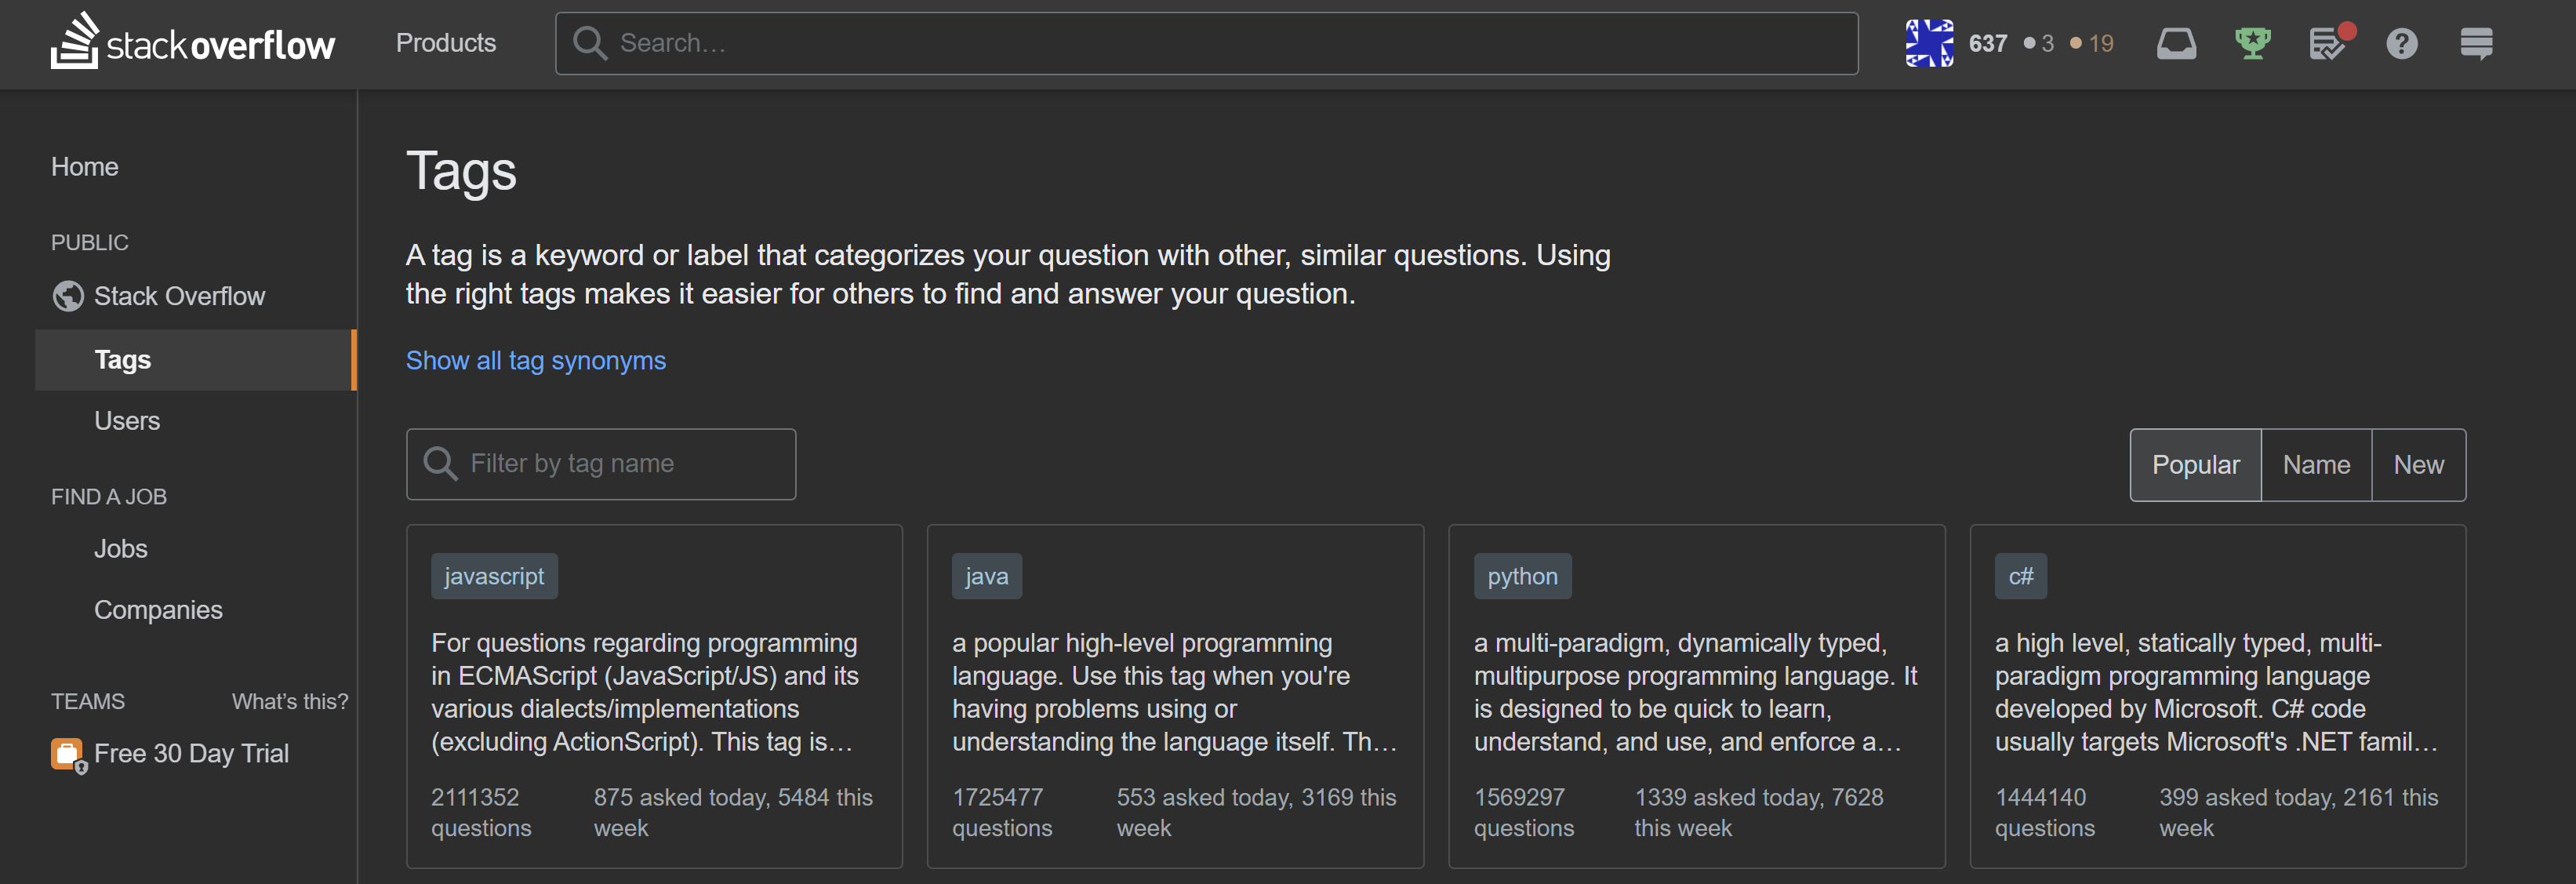 Stackoverflow tags page.